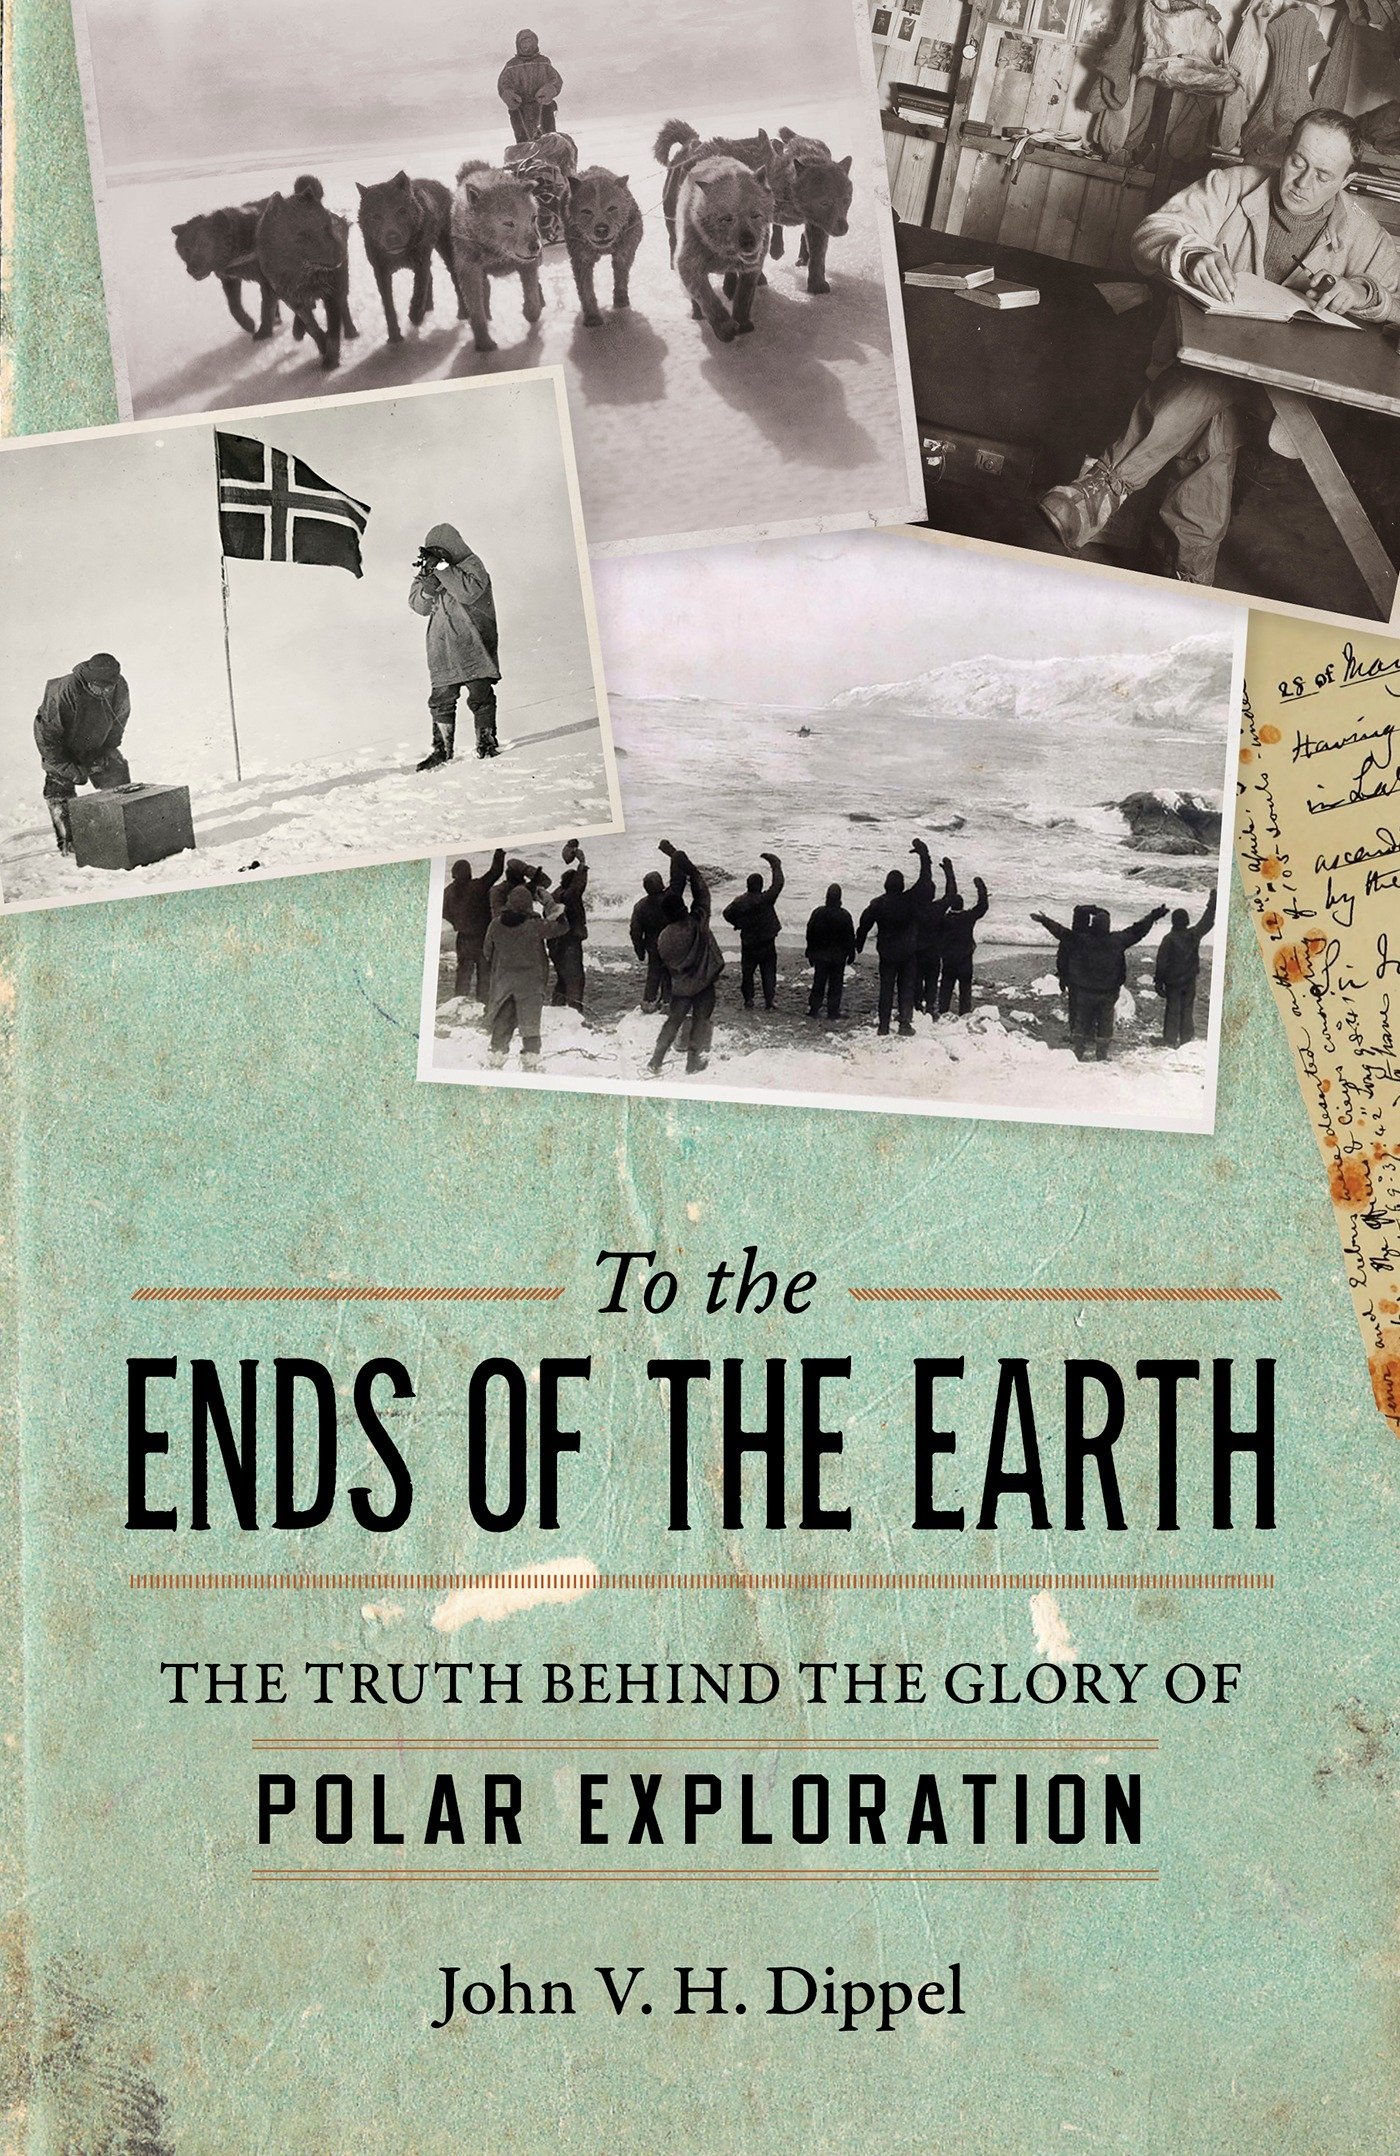 To the Ends of the Earth: The Truth Behind the Glory of Polar Exploration